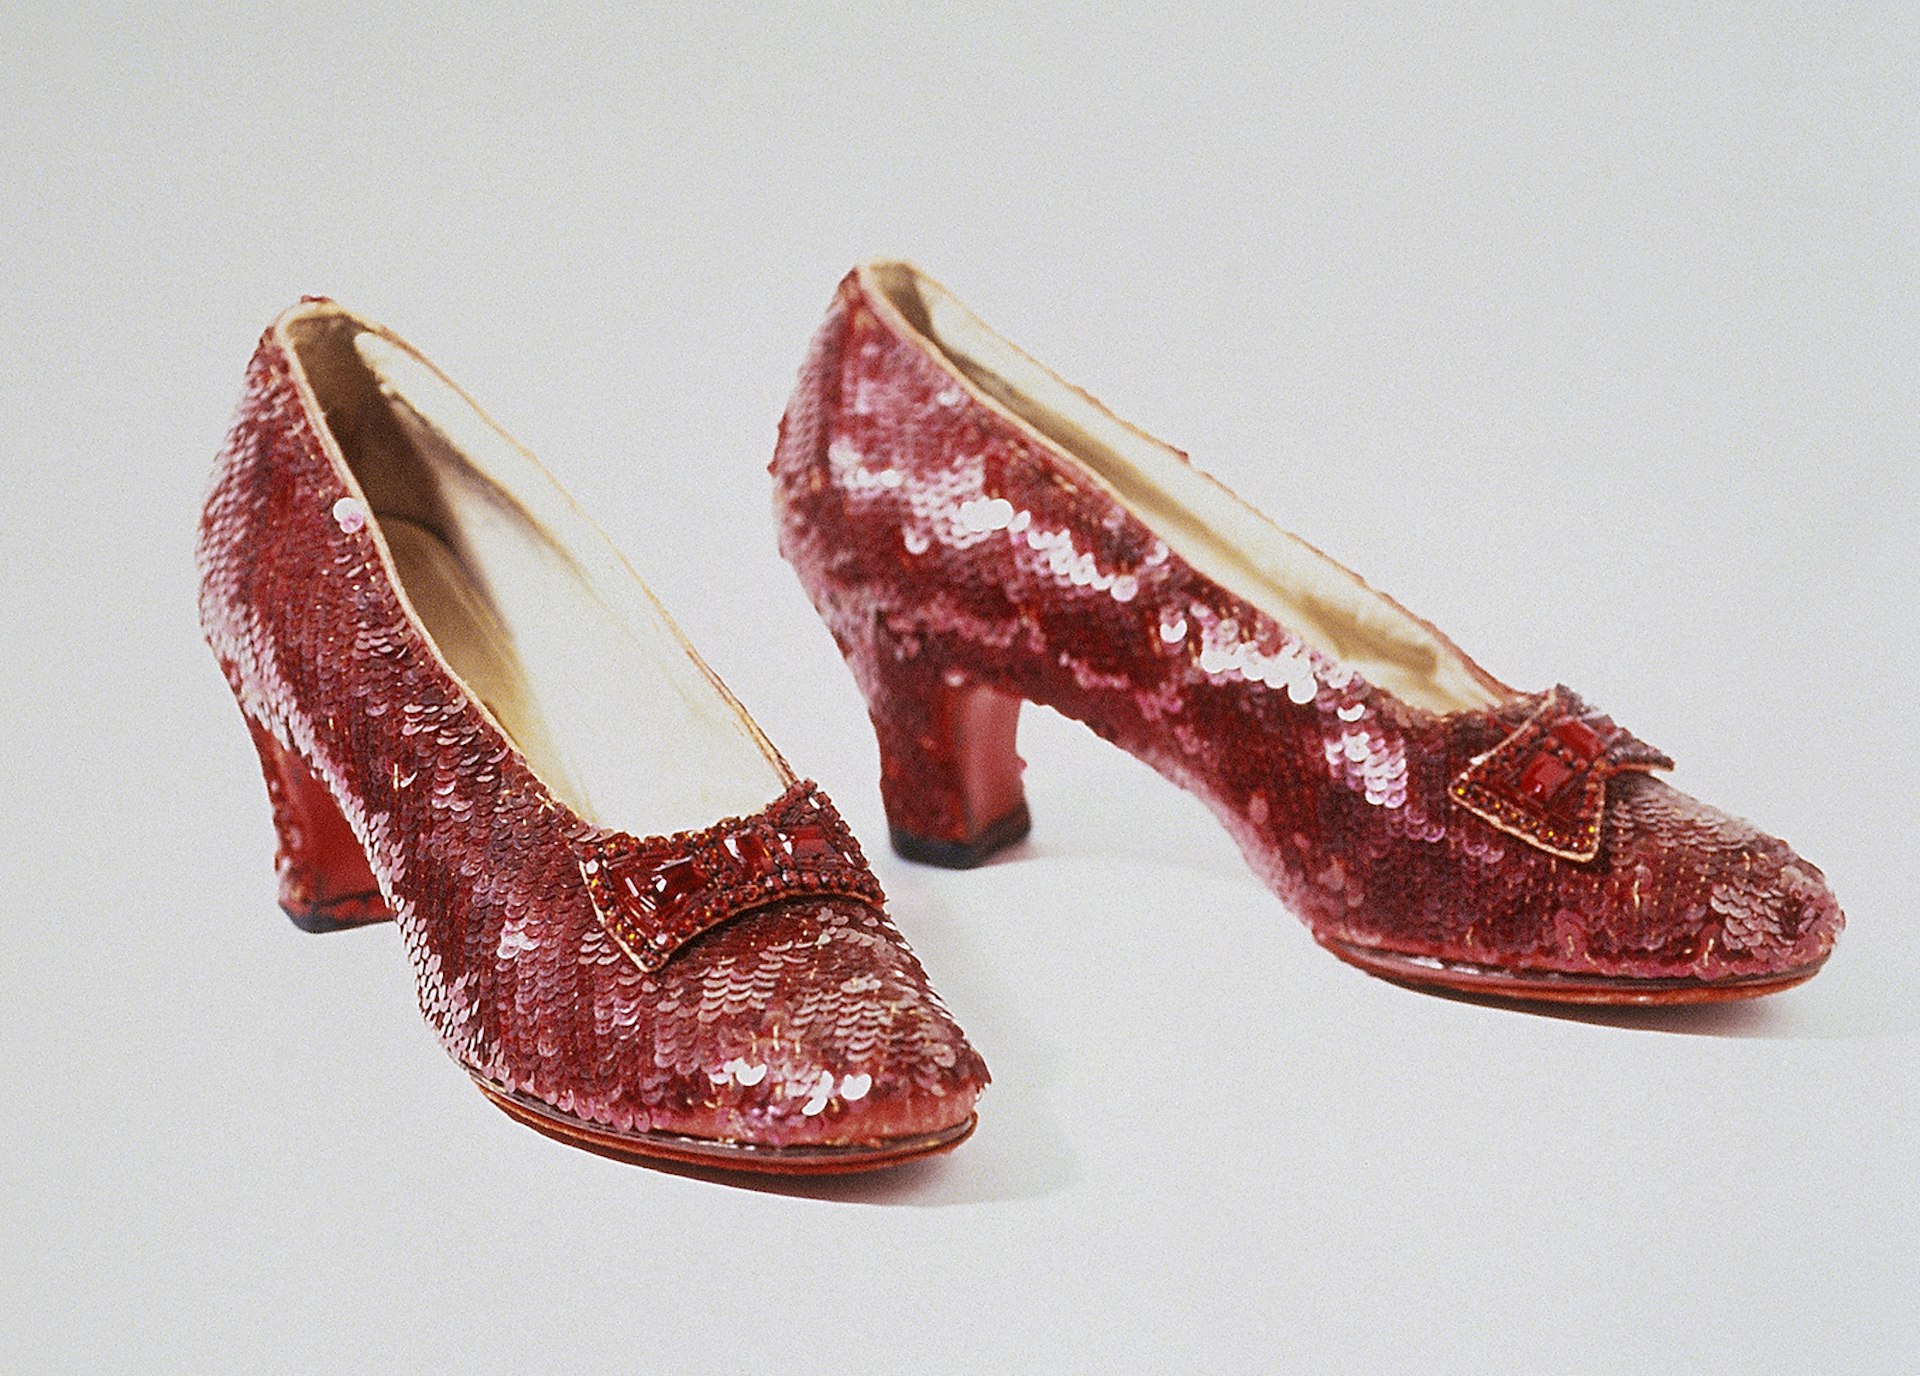 A pair of red sequined ruby slippers, worn by Dorothy in the Wizard of Oz